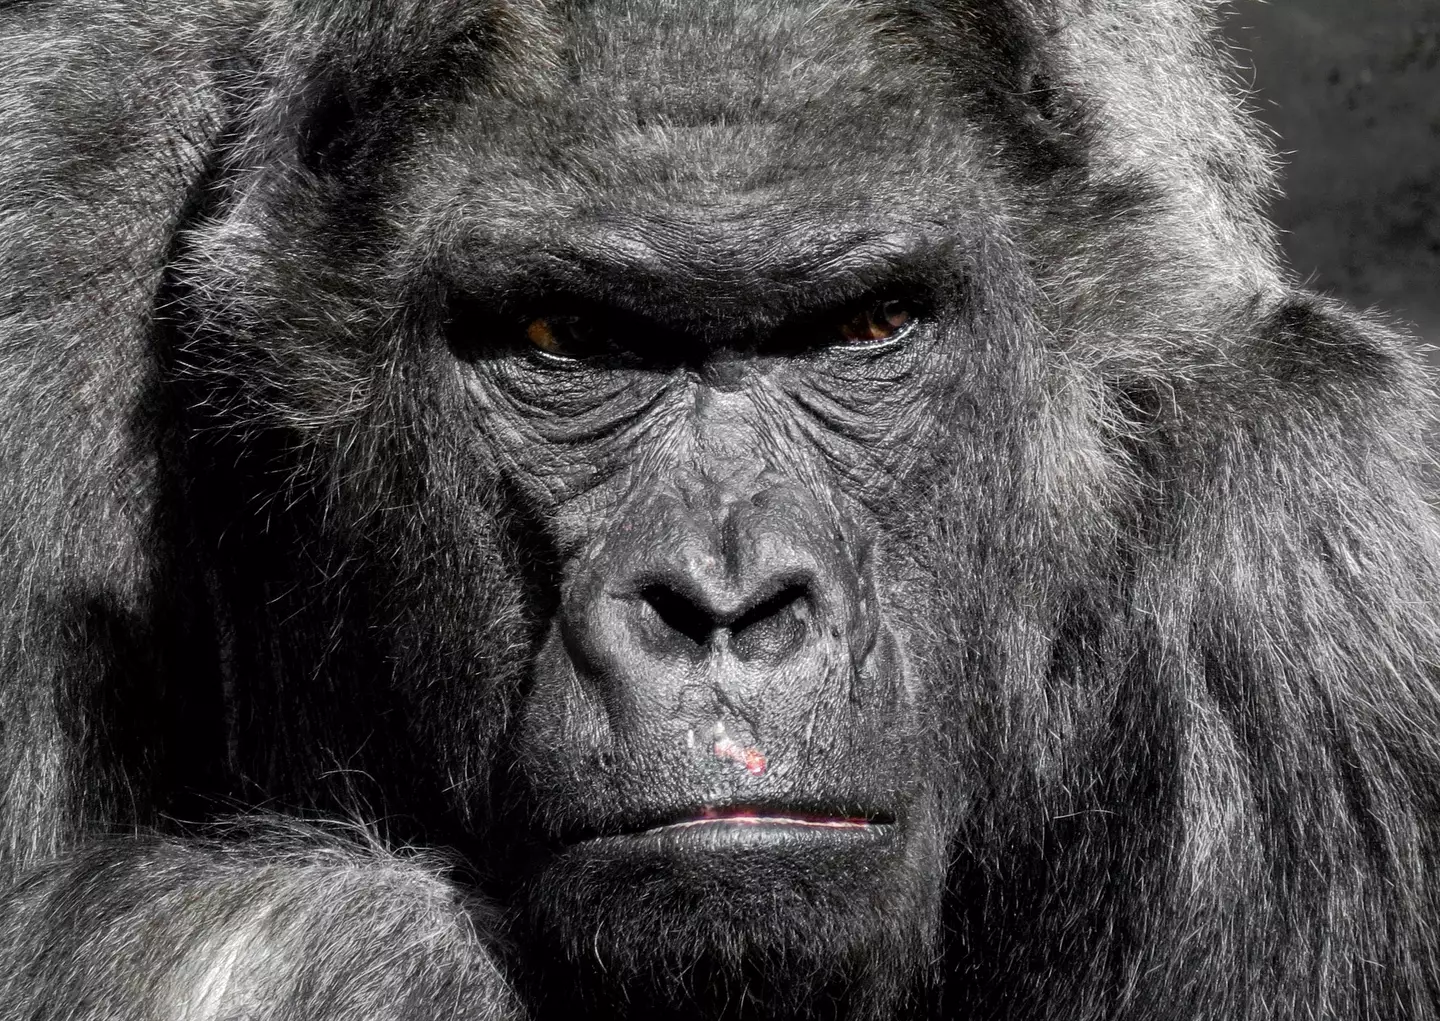 Gorillas don't react well to eye contact. (Pexels)